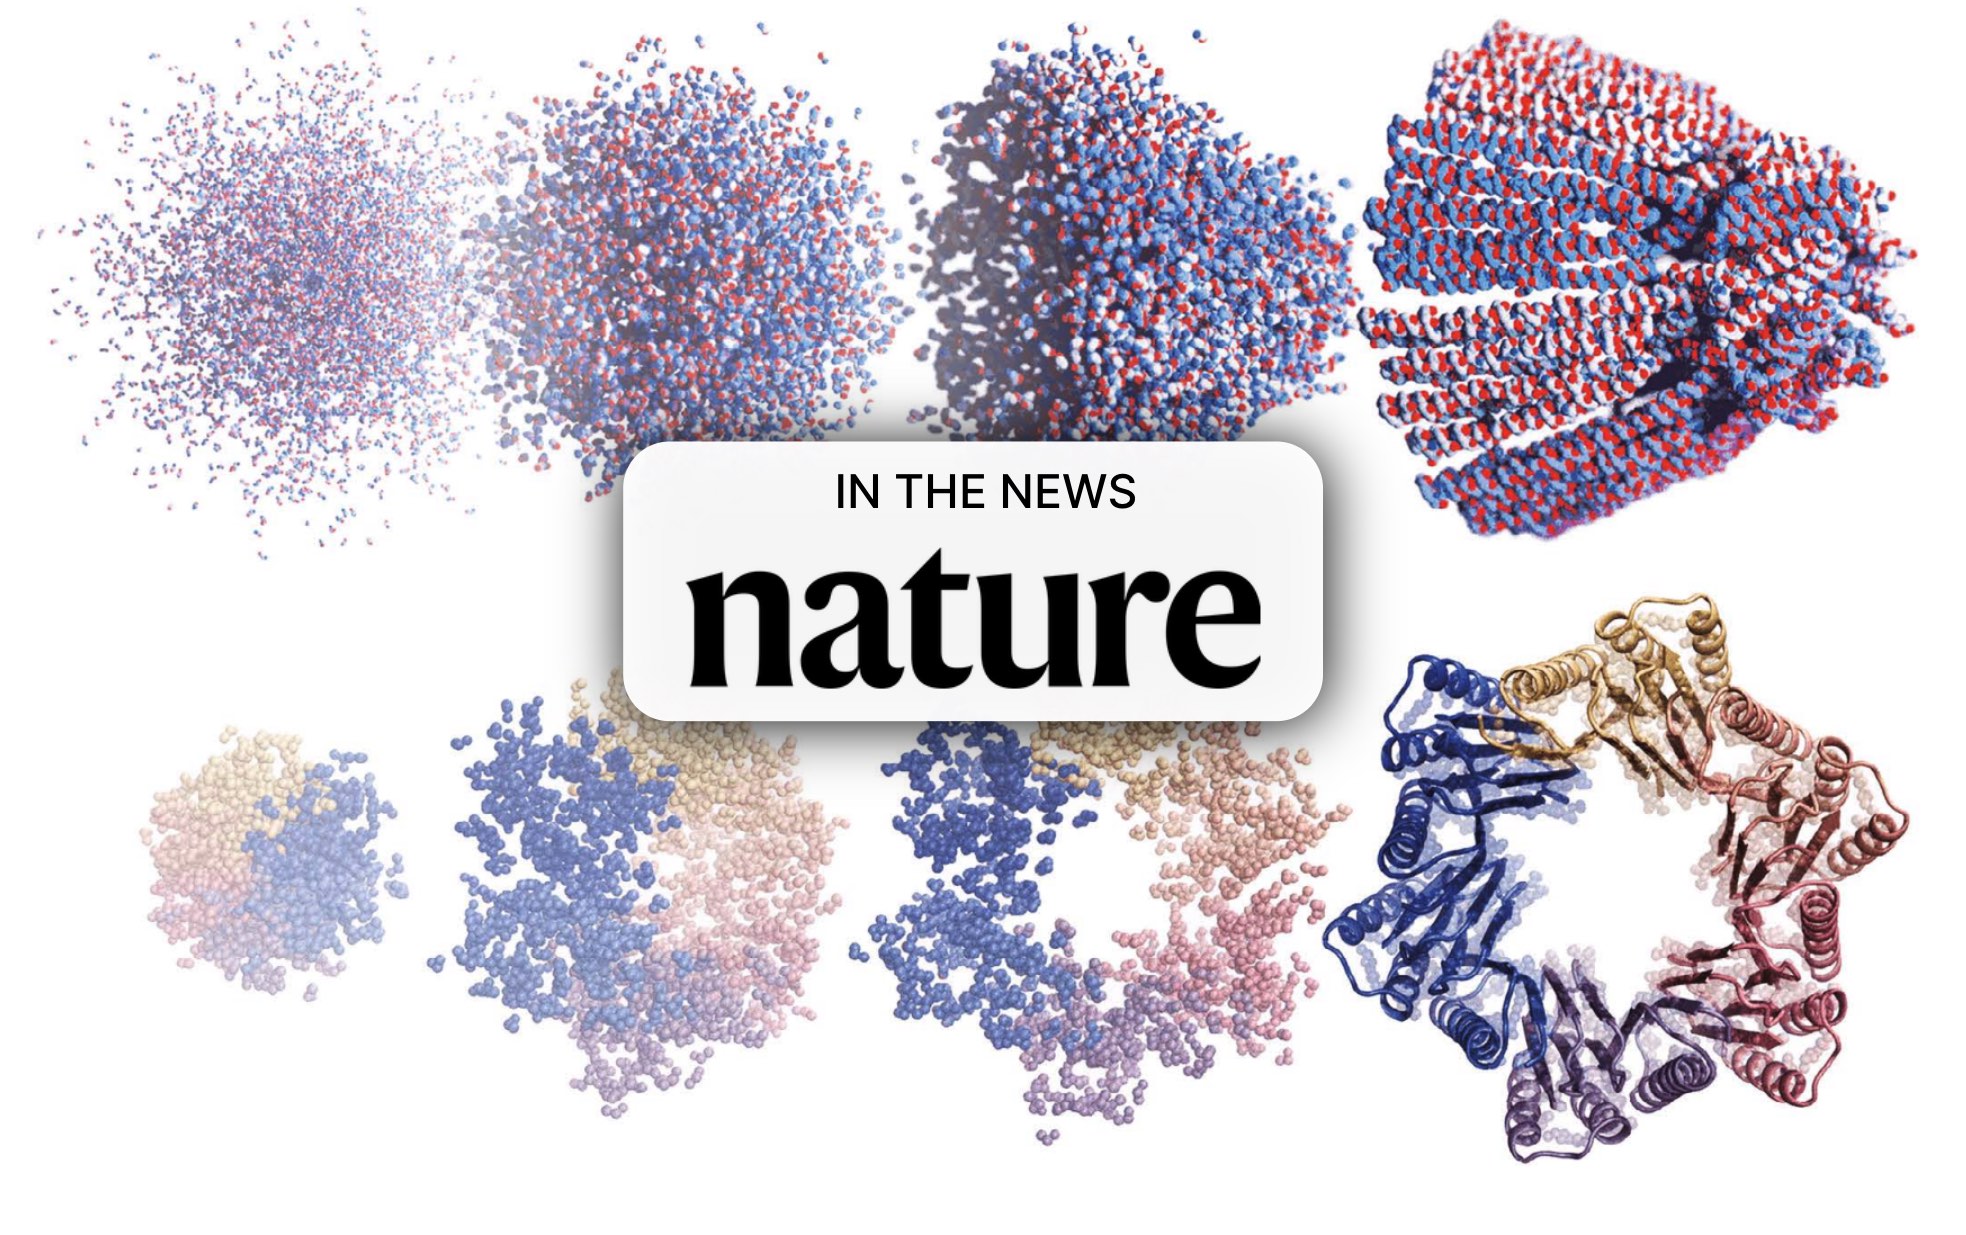 Nature: “AI tools are designing entirely new proteins that could transform medicine”